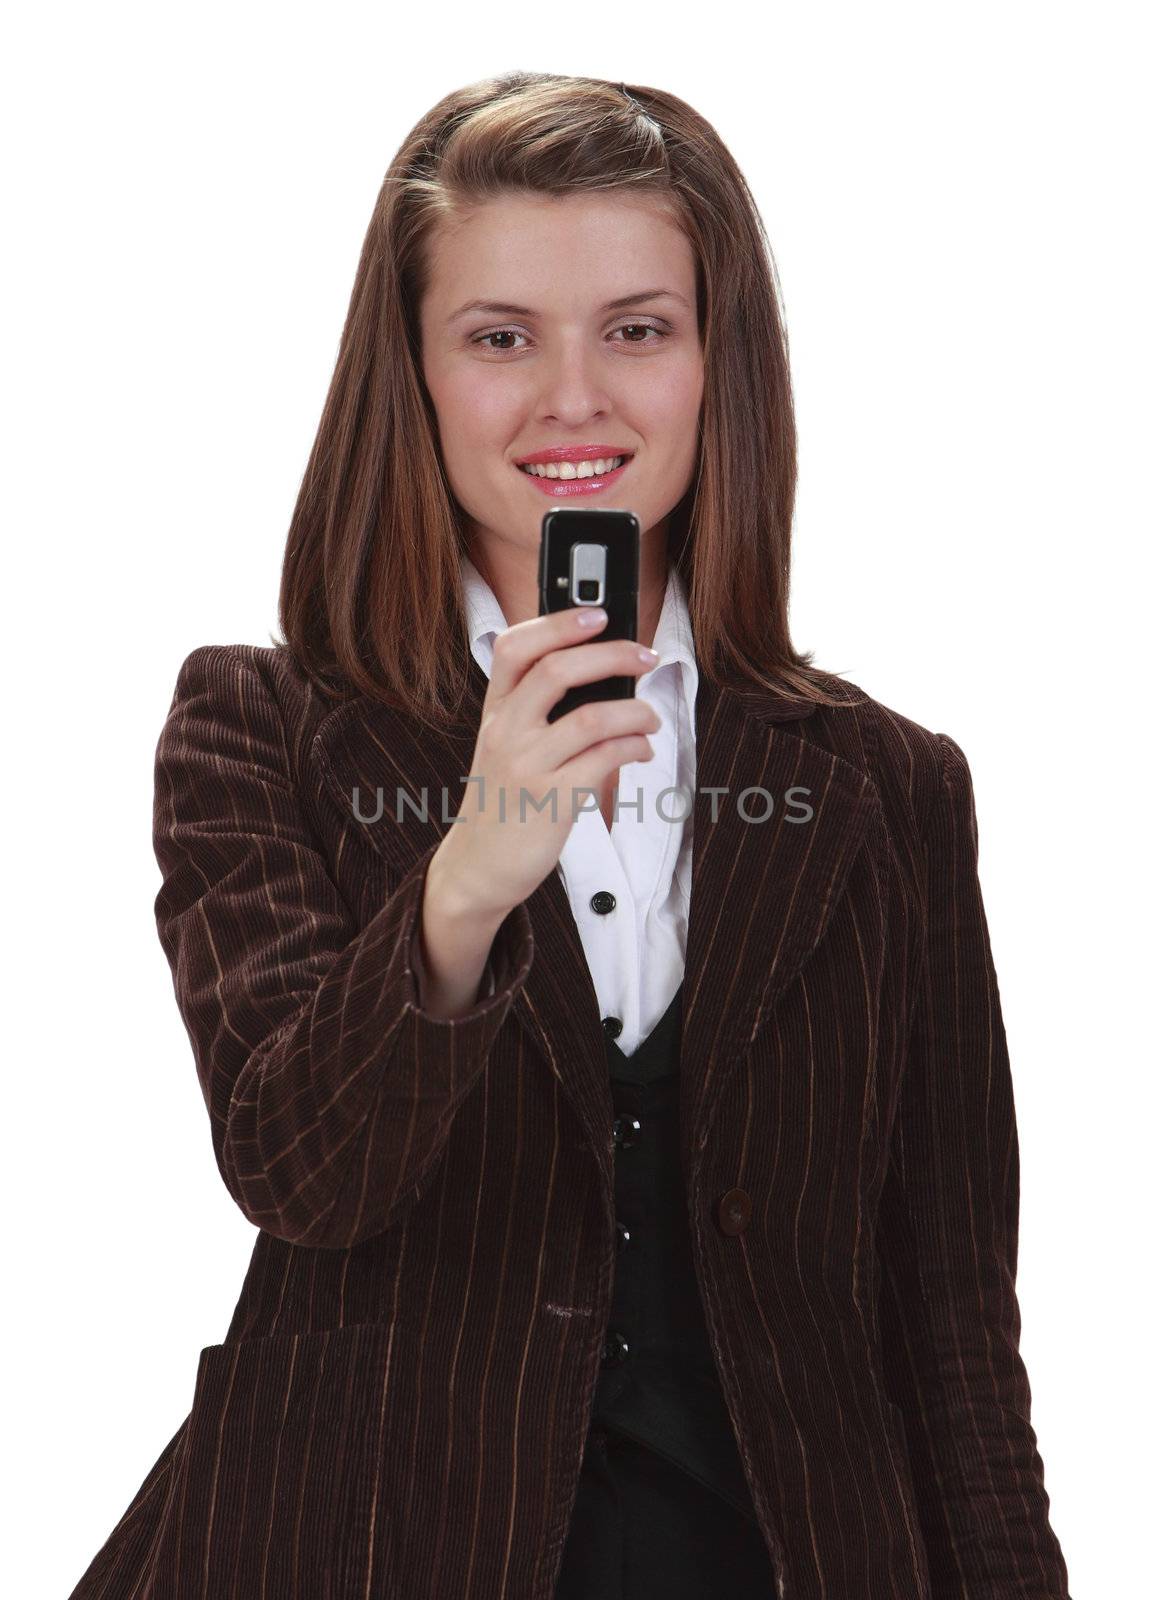 Image of a young woman taking photos with a mobile phone camera. The main focus is on her face.